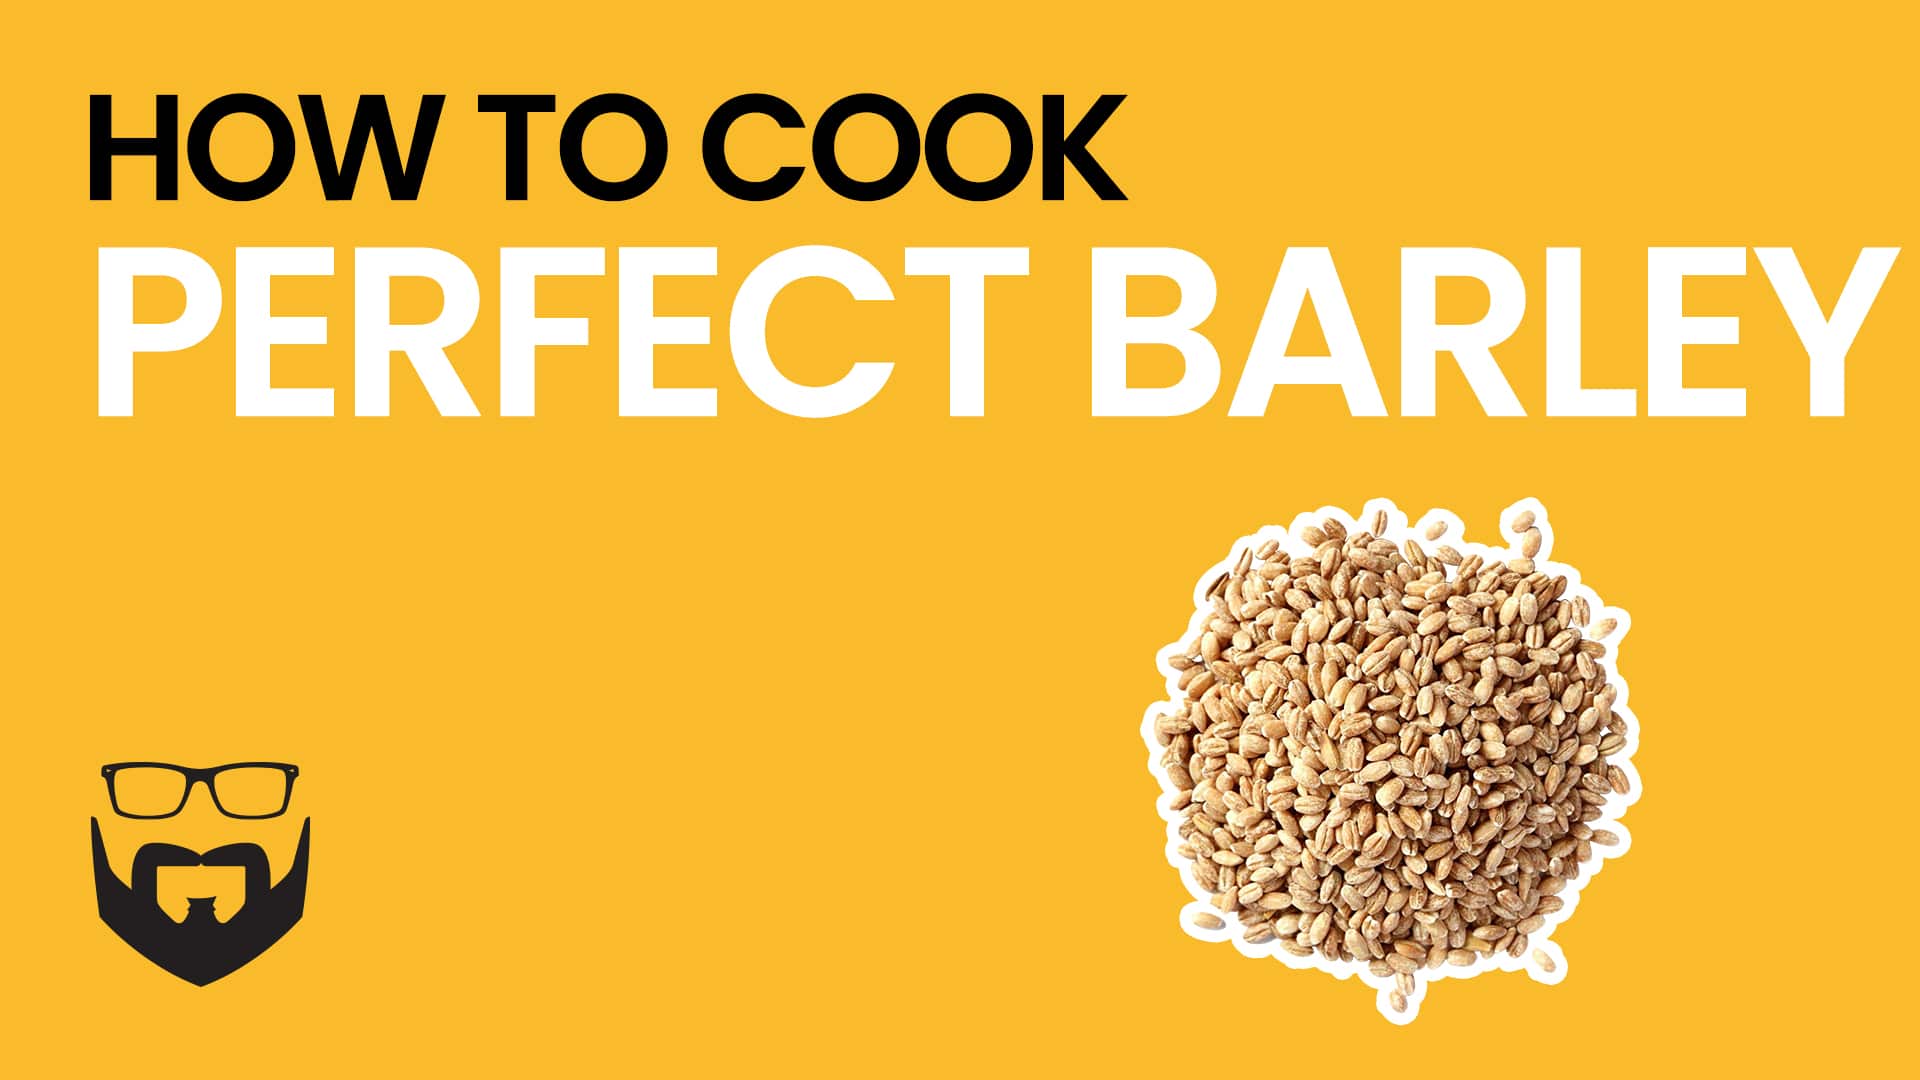 How to Cook Perfect Barley Video - Yellow